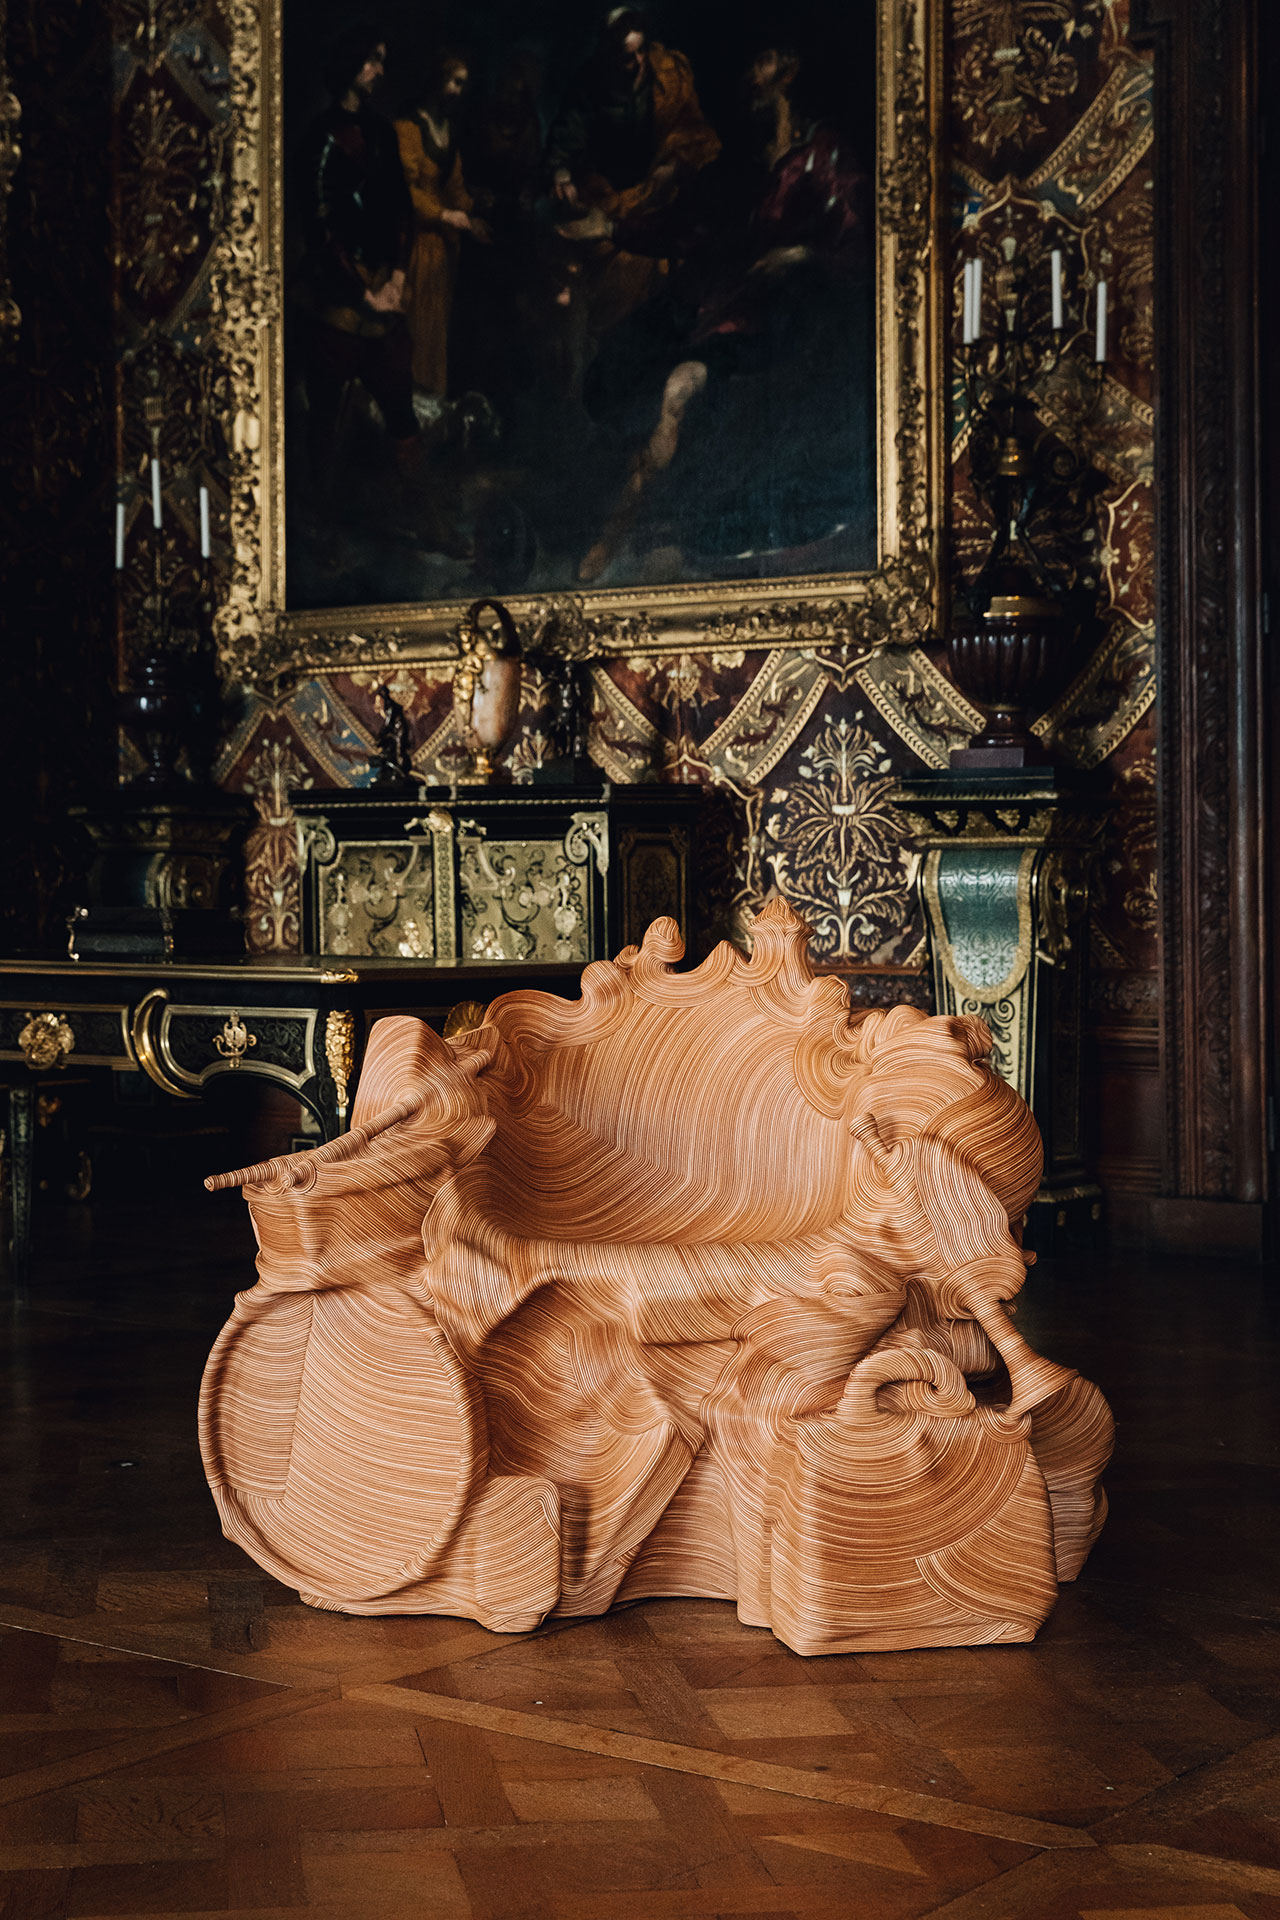 Installation view. "Mirror Mirror: Reflections on Design at Chatsworth". Image courtesy of Jay Sae Jung Oh and Chatsworth House Trust. © Chatsworth House Trust. Photo by India Hobson.